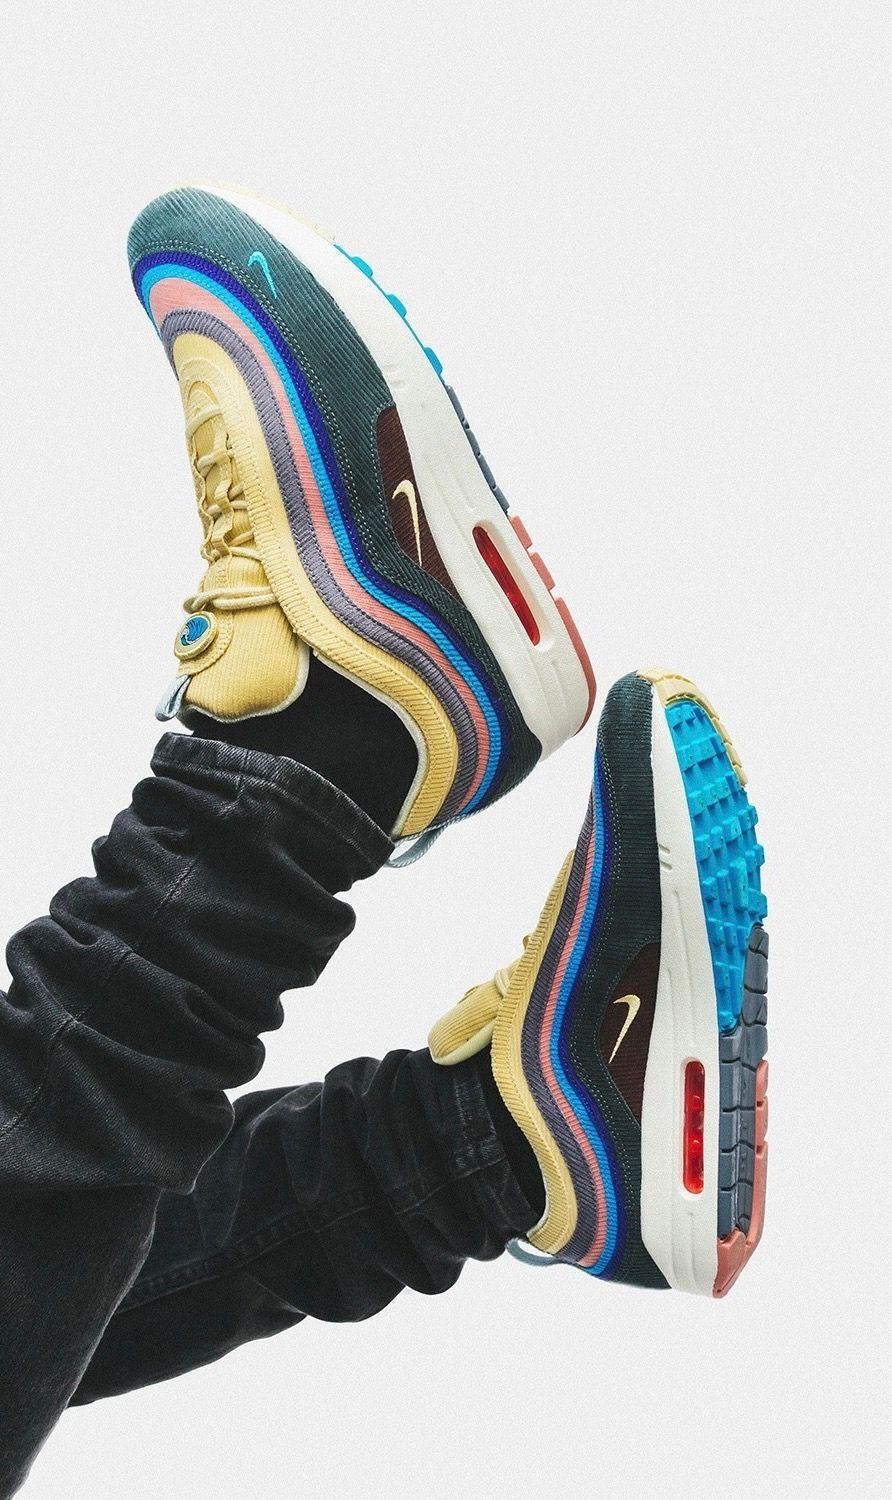 Sean Wotherspoon X Nike Air Max 97 1. Shoes. Hype Shoes, Nike